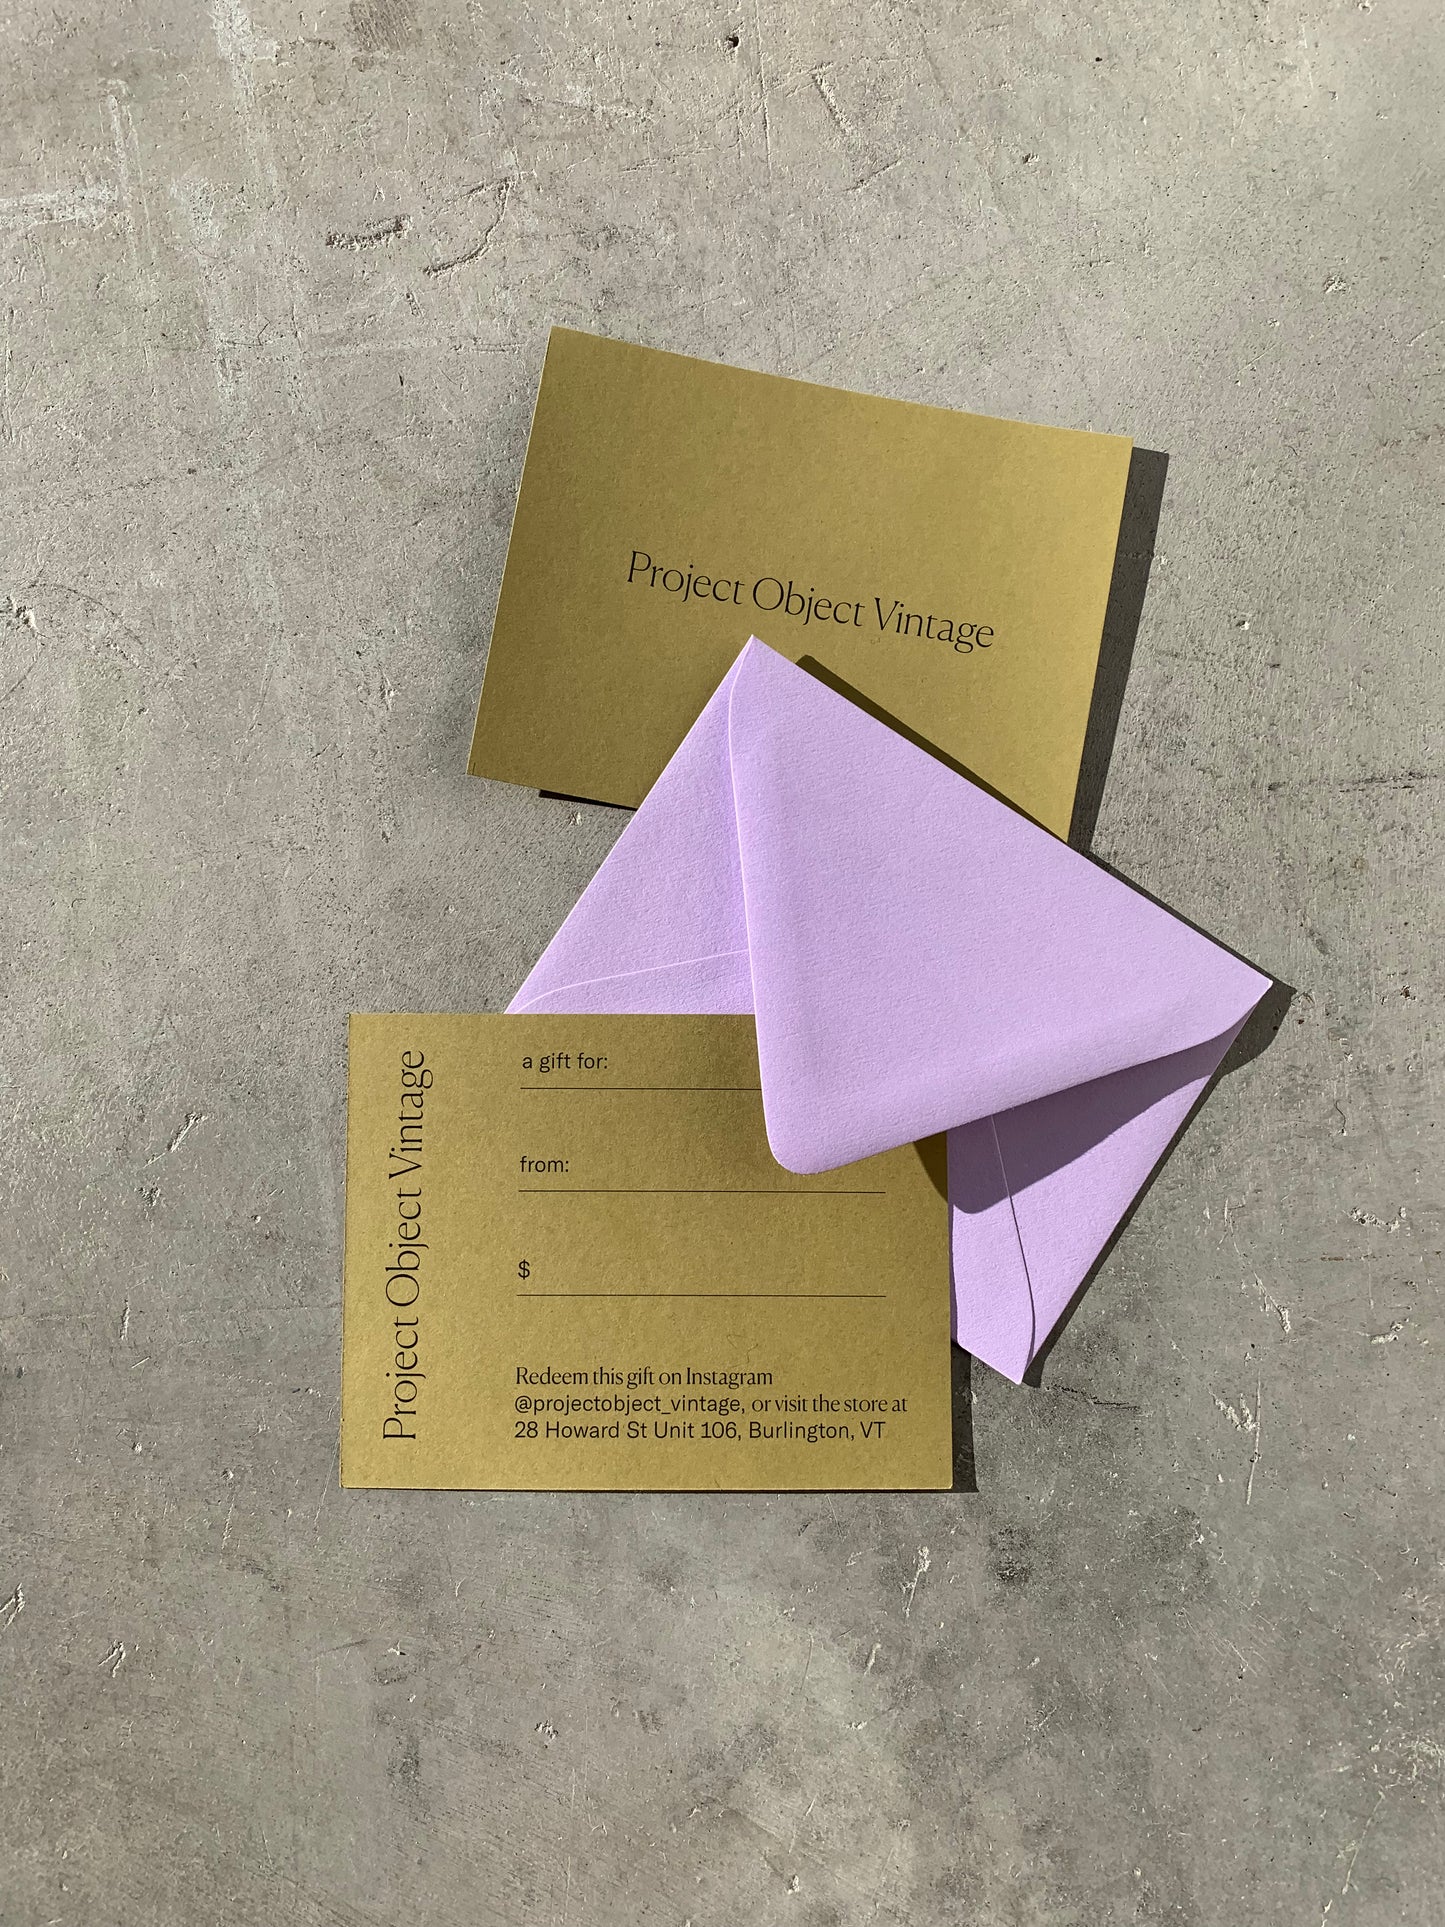 Gift card to Project Object Vintage